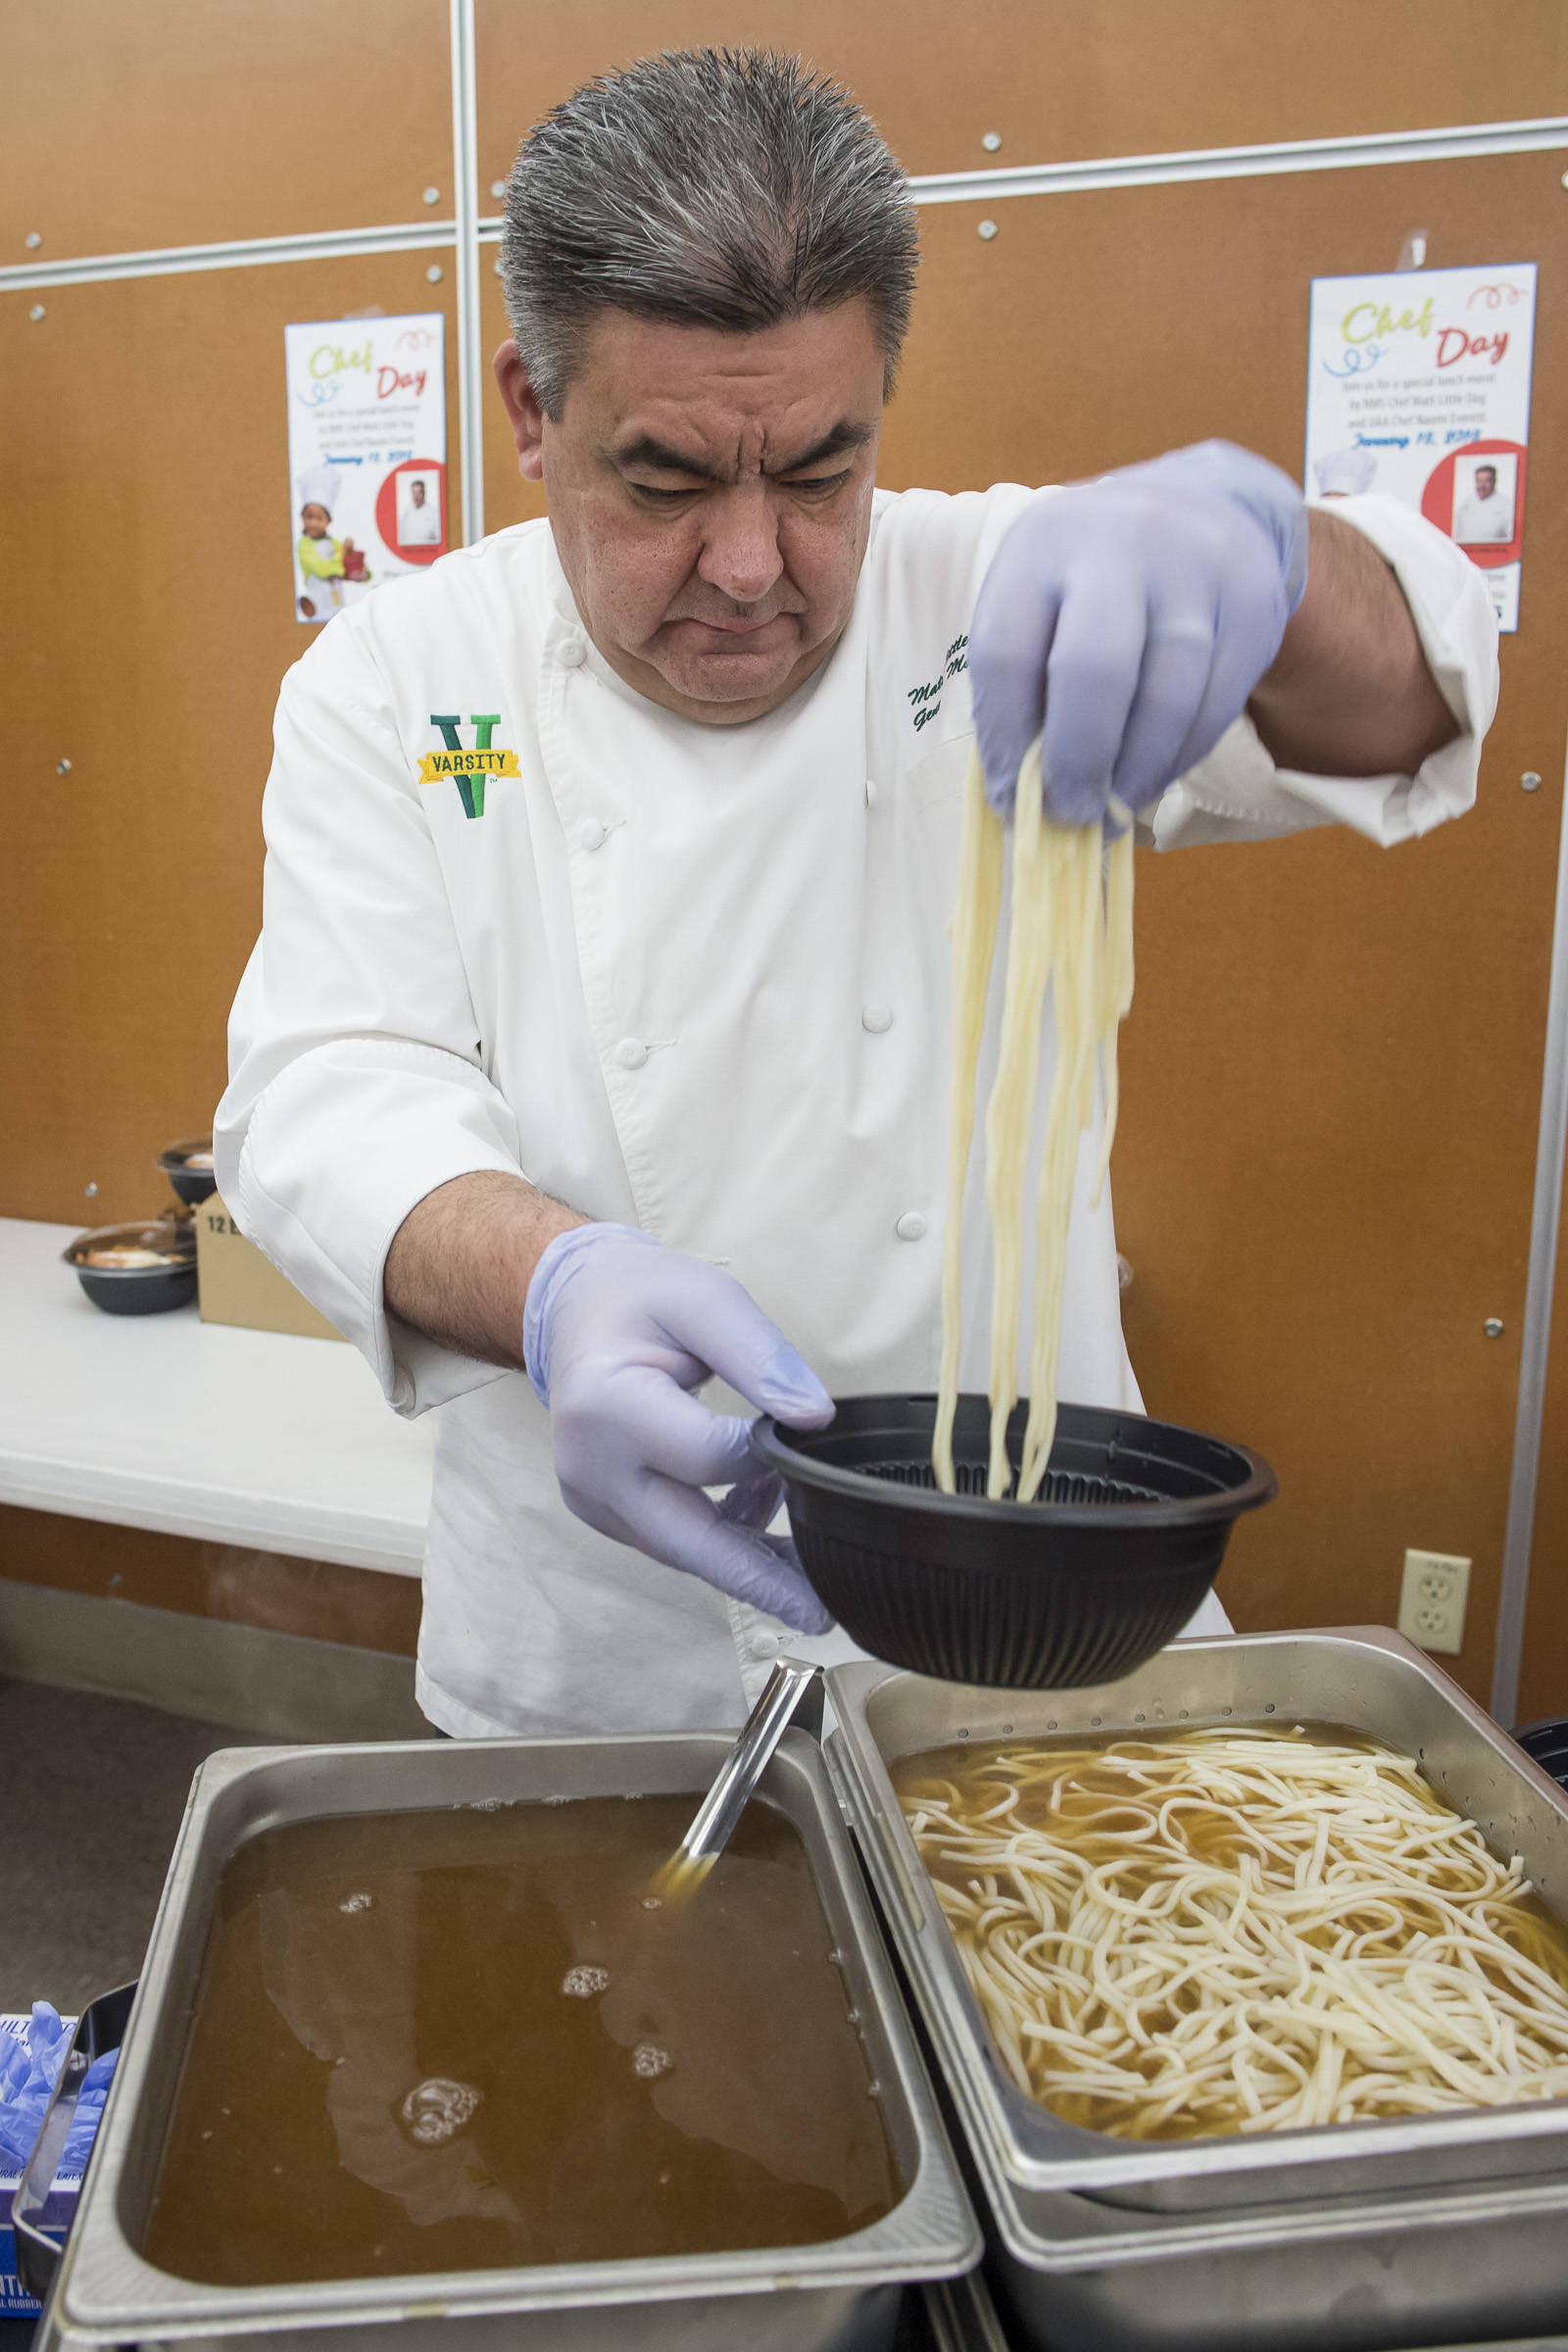 Chef Matt Little Dog prepares a bowl of authentic Japanese ramen at Floyd Dryden Middle School as part of Chefs’ Day on Friday, Jan. 18, 2019. The Anchorage chefs visiting the Juneau and Sitka School Districts to introduced new and healthy foods via performance cooking demonstrations. (Michael Penn | Juneau Empire)